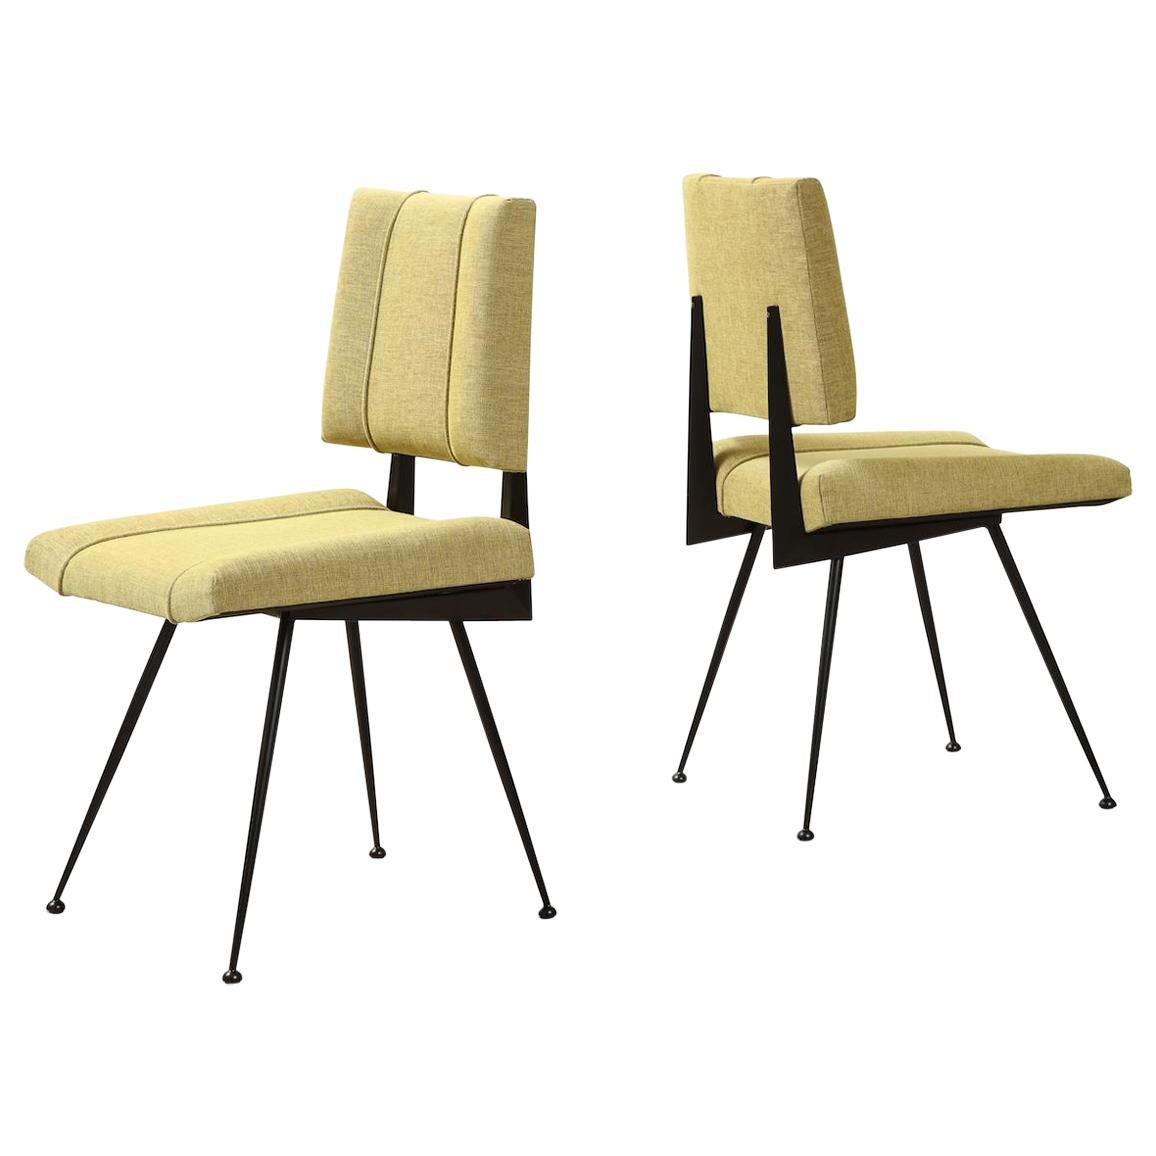 "Contour" Dining Chair by Donzella